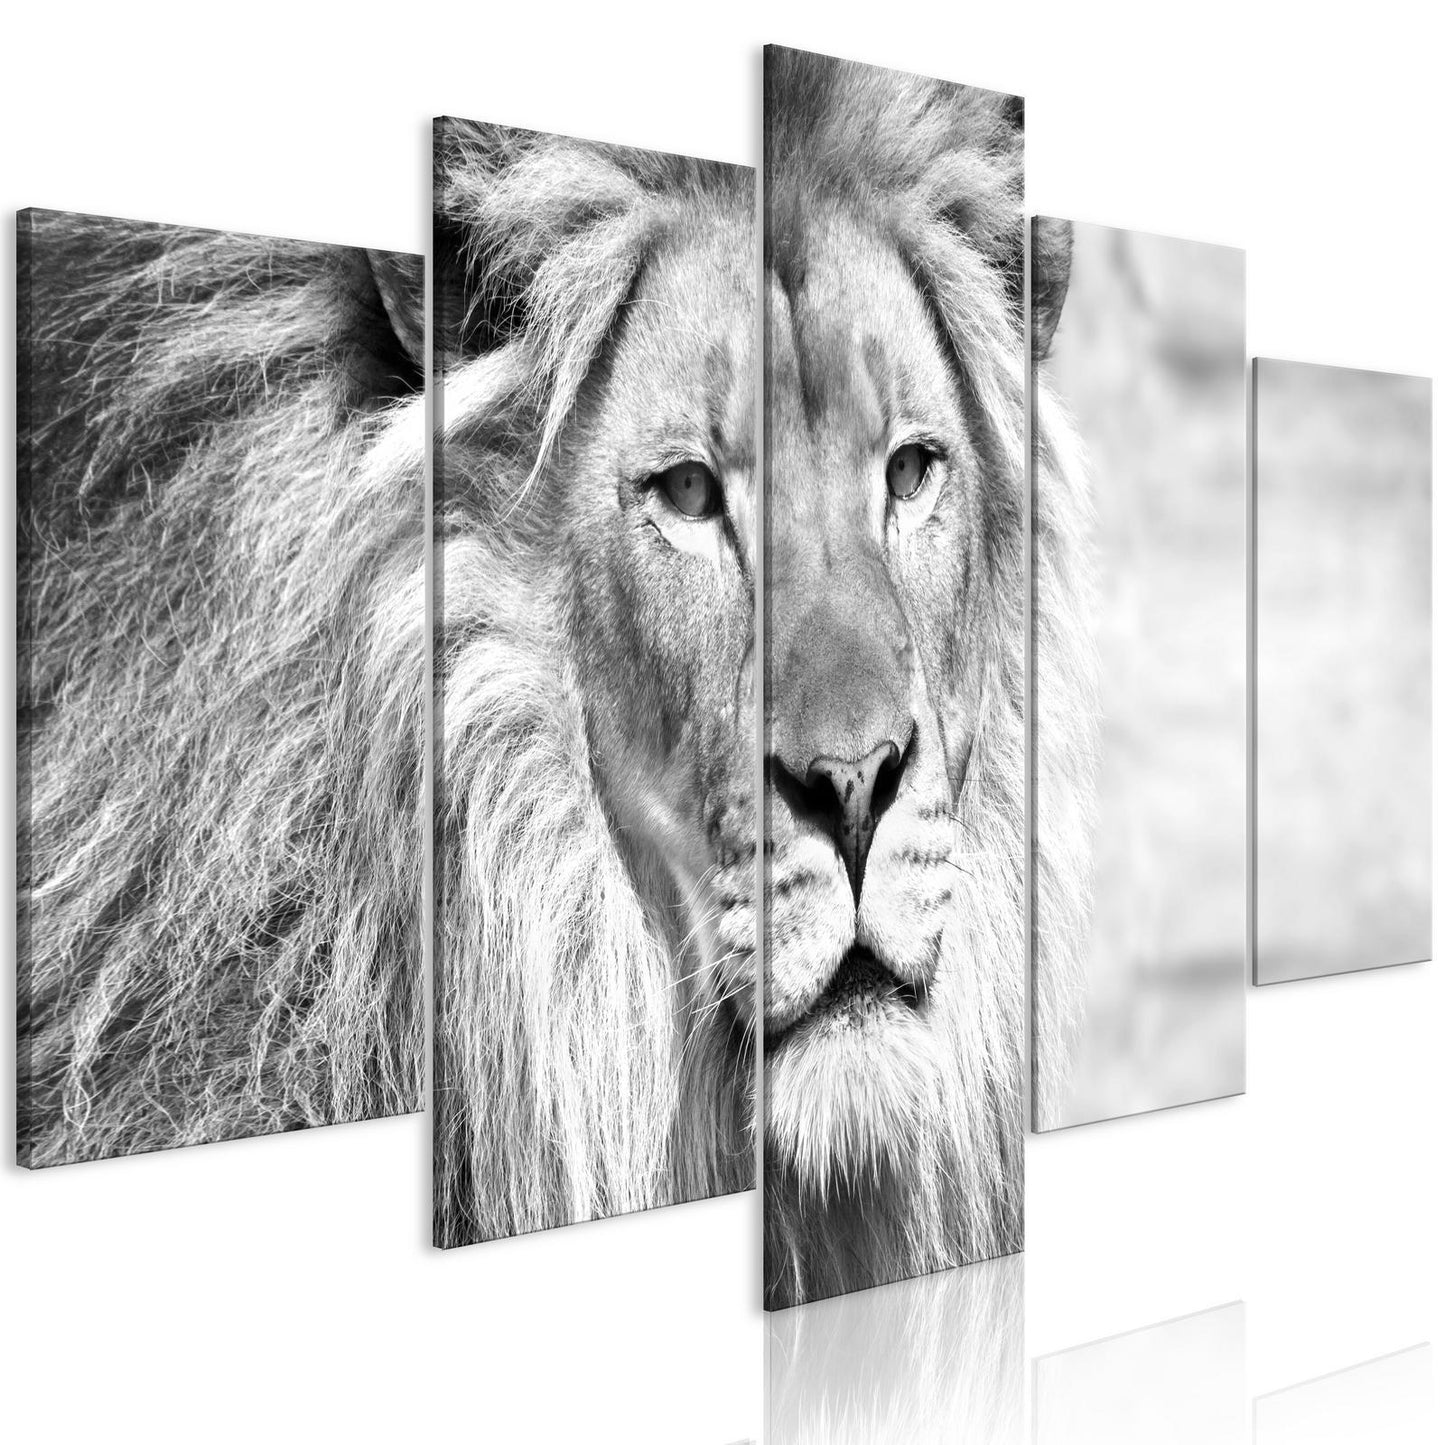 Painting - The King of Beasts (5 Parts) Wide Black and White